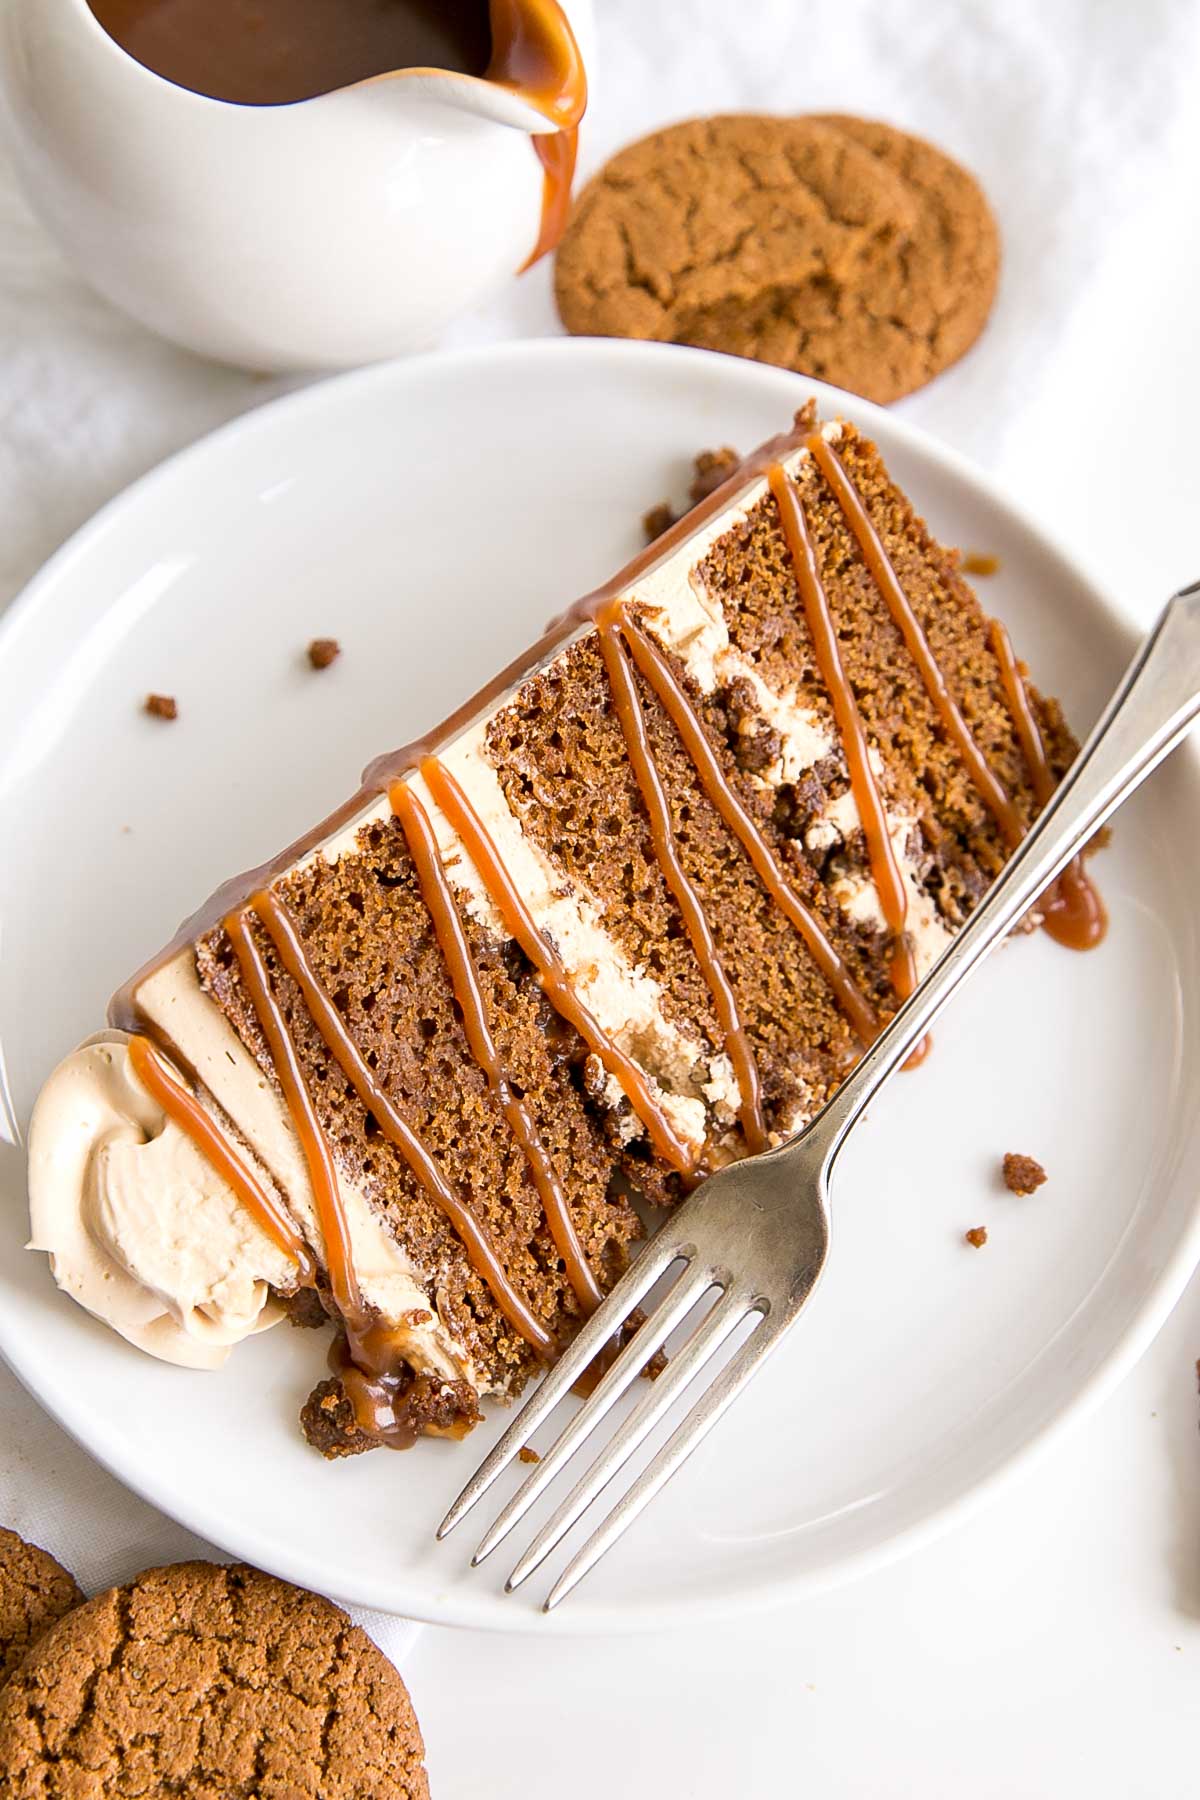 Slice of gingerbread cake on a plate with caramel drizzle over top.